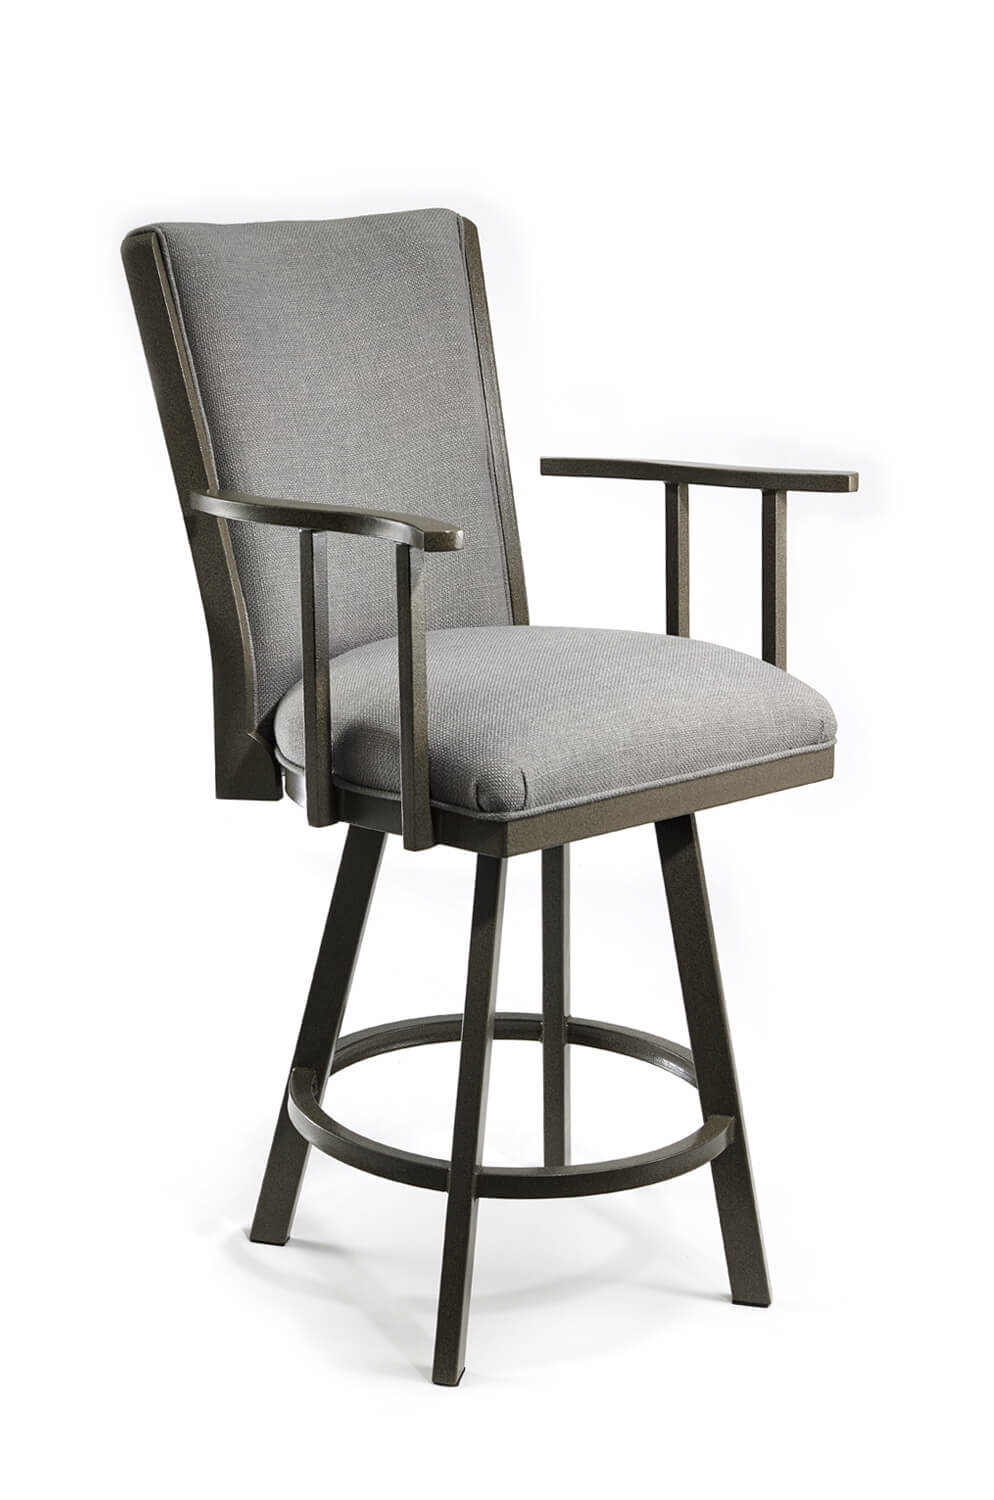 Comfortable Swivel Stool, Bar Stools That Swivel And Have Arms